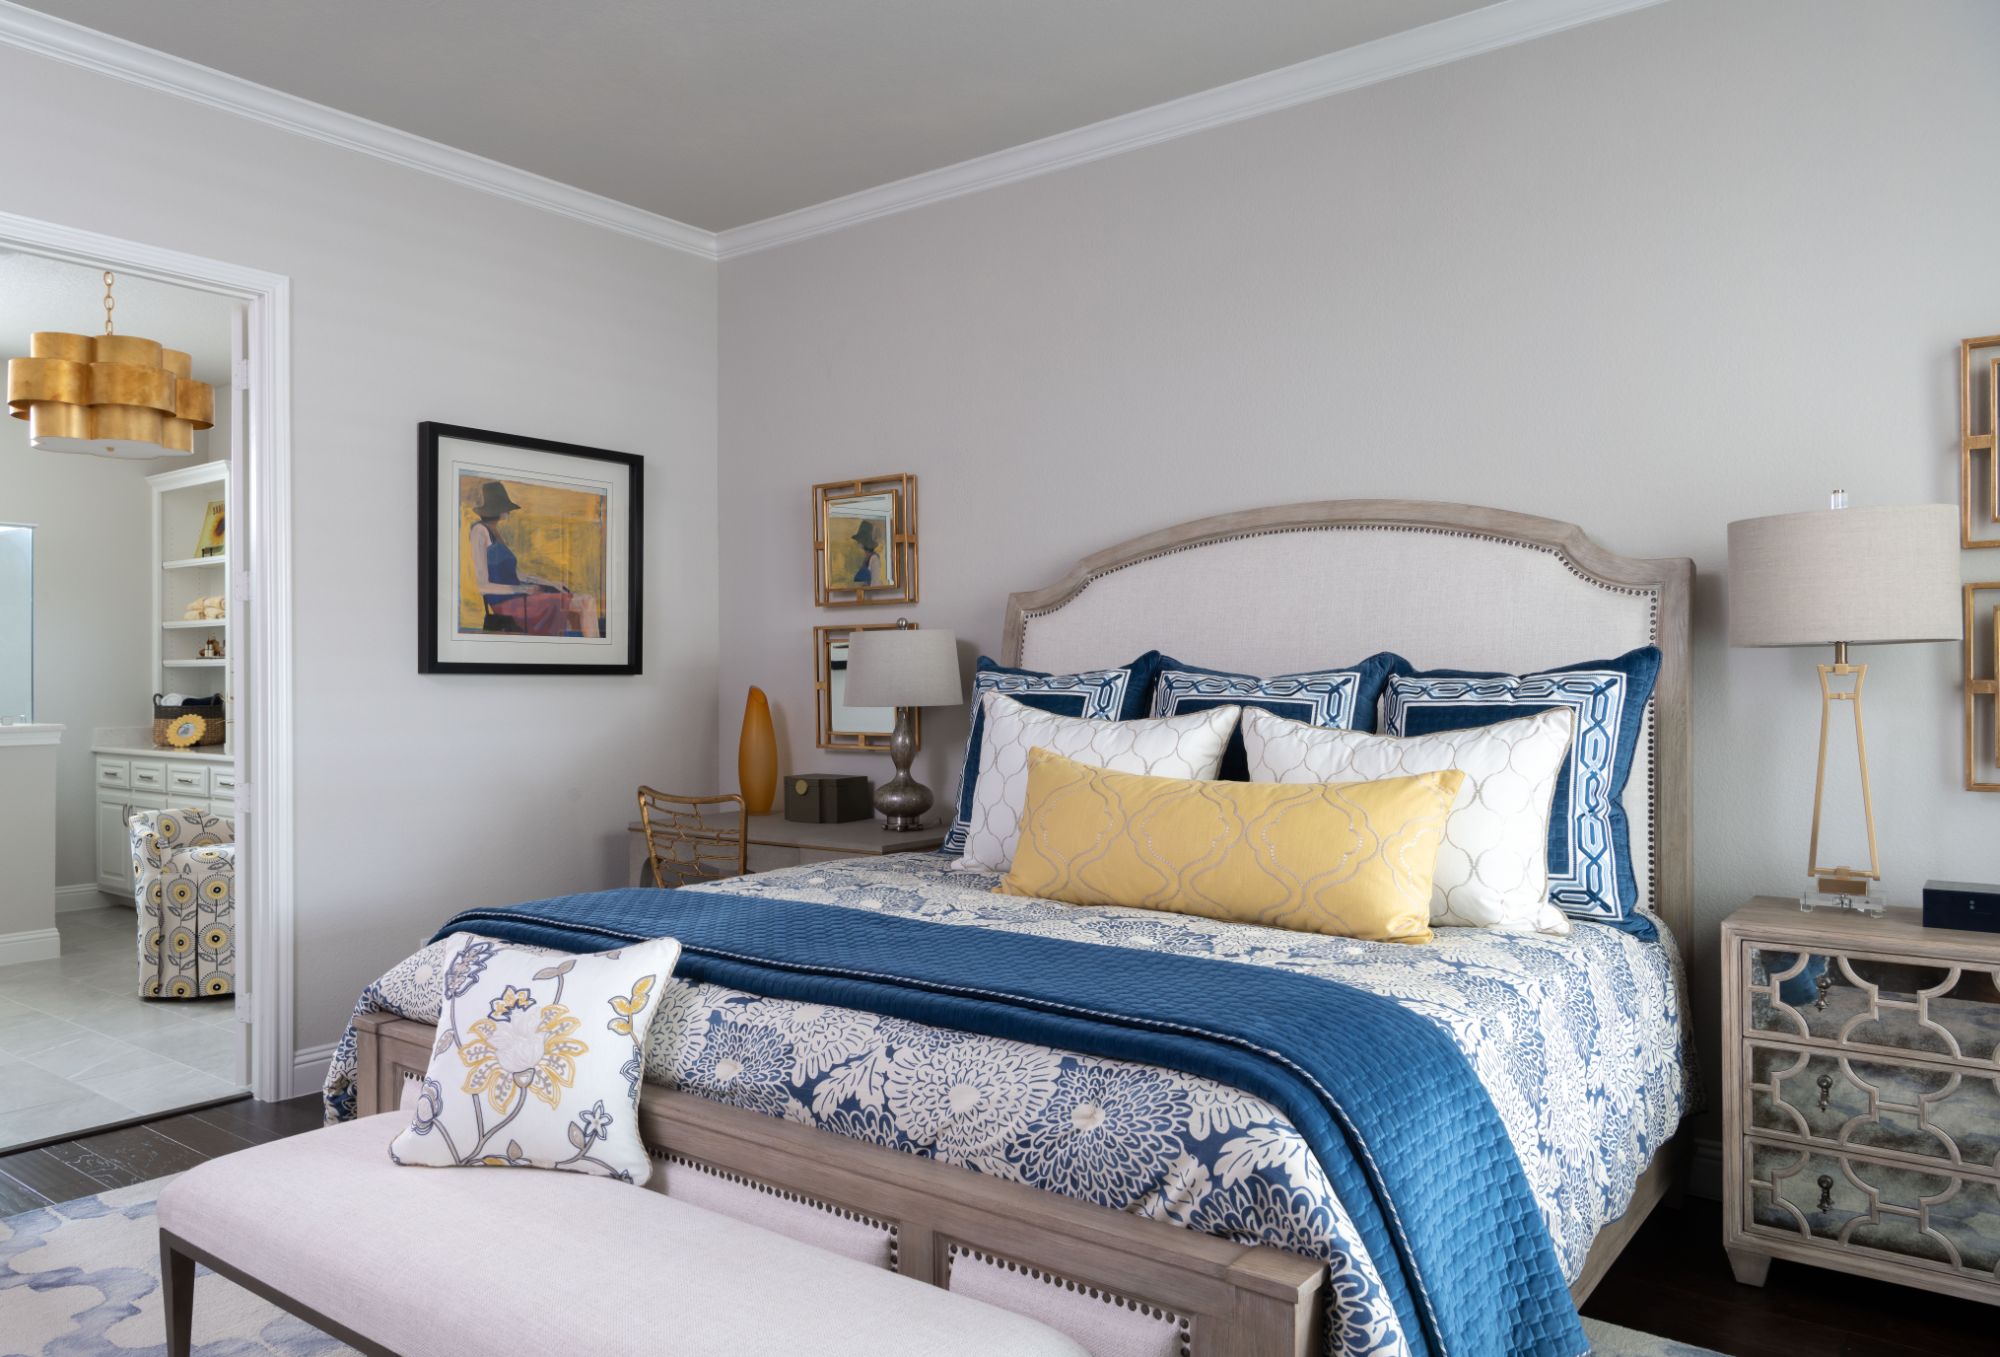 Upgrading the guest room: 5 things you need to know